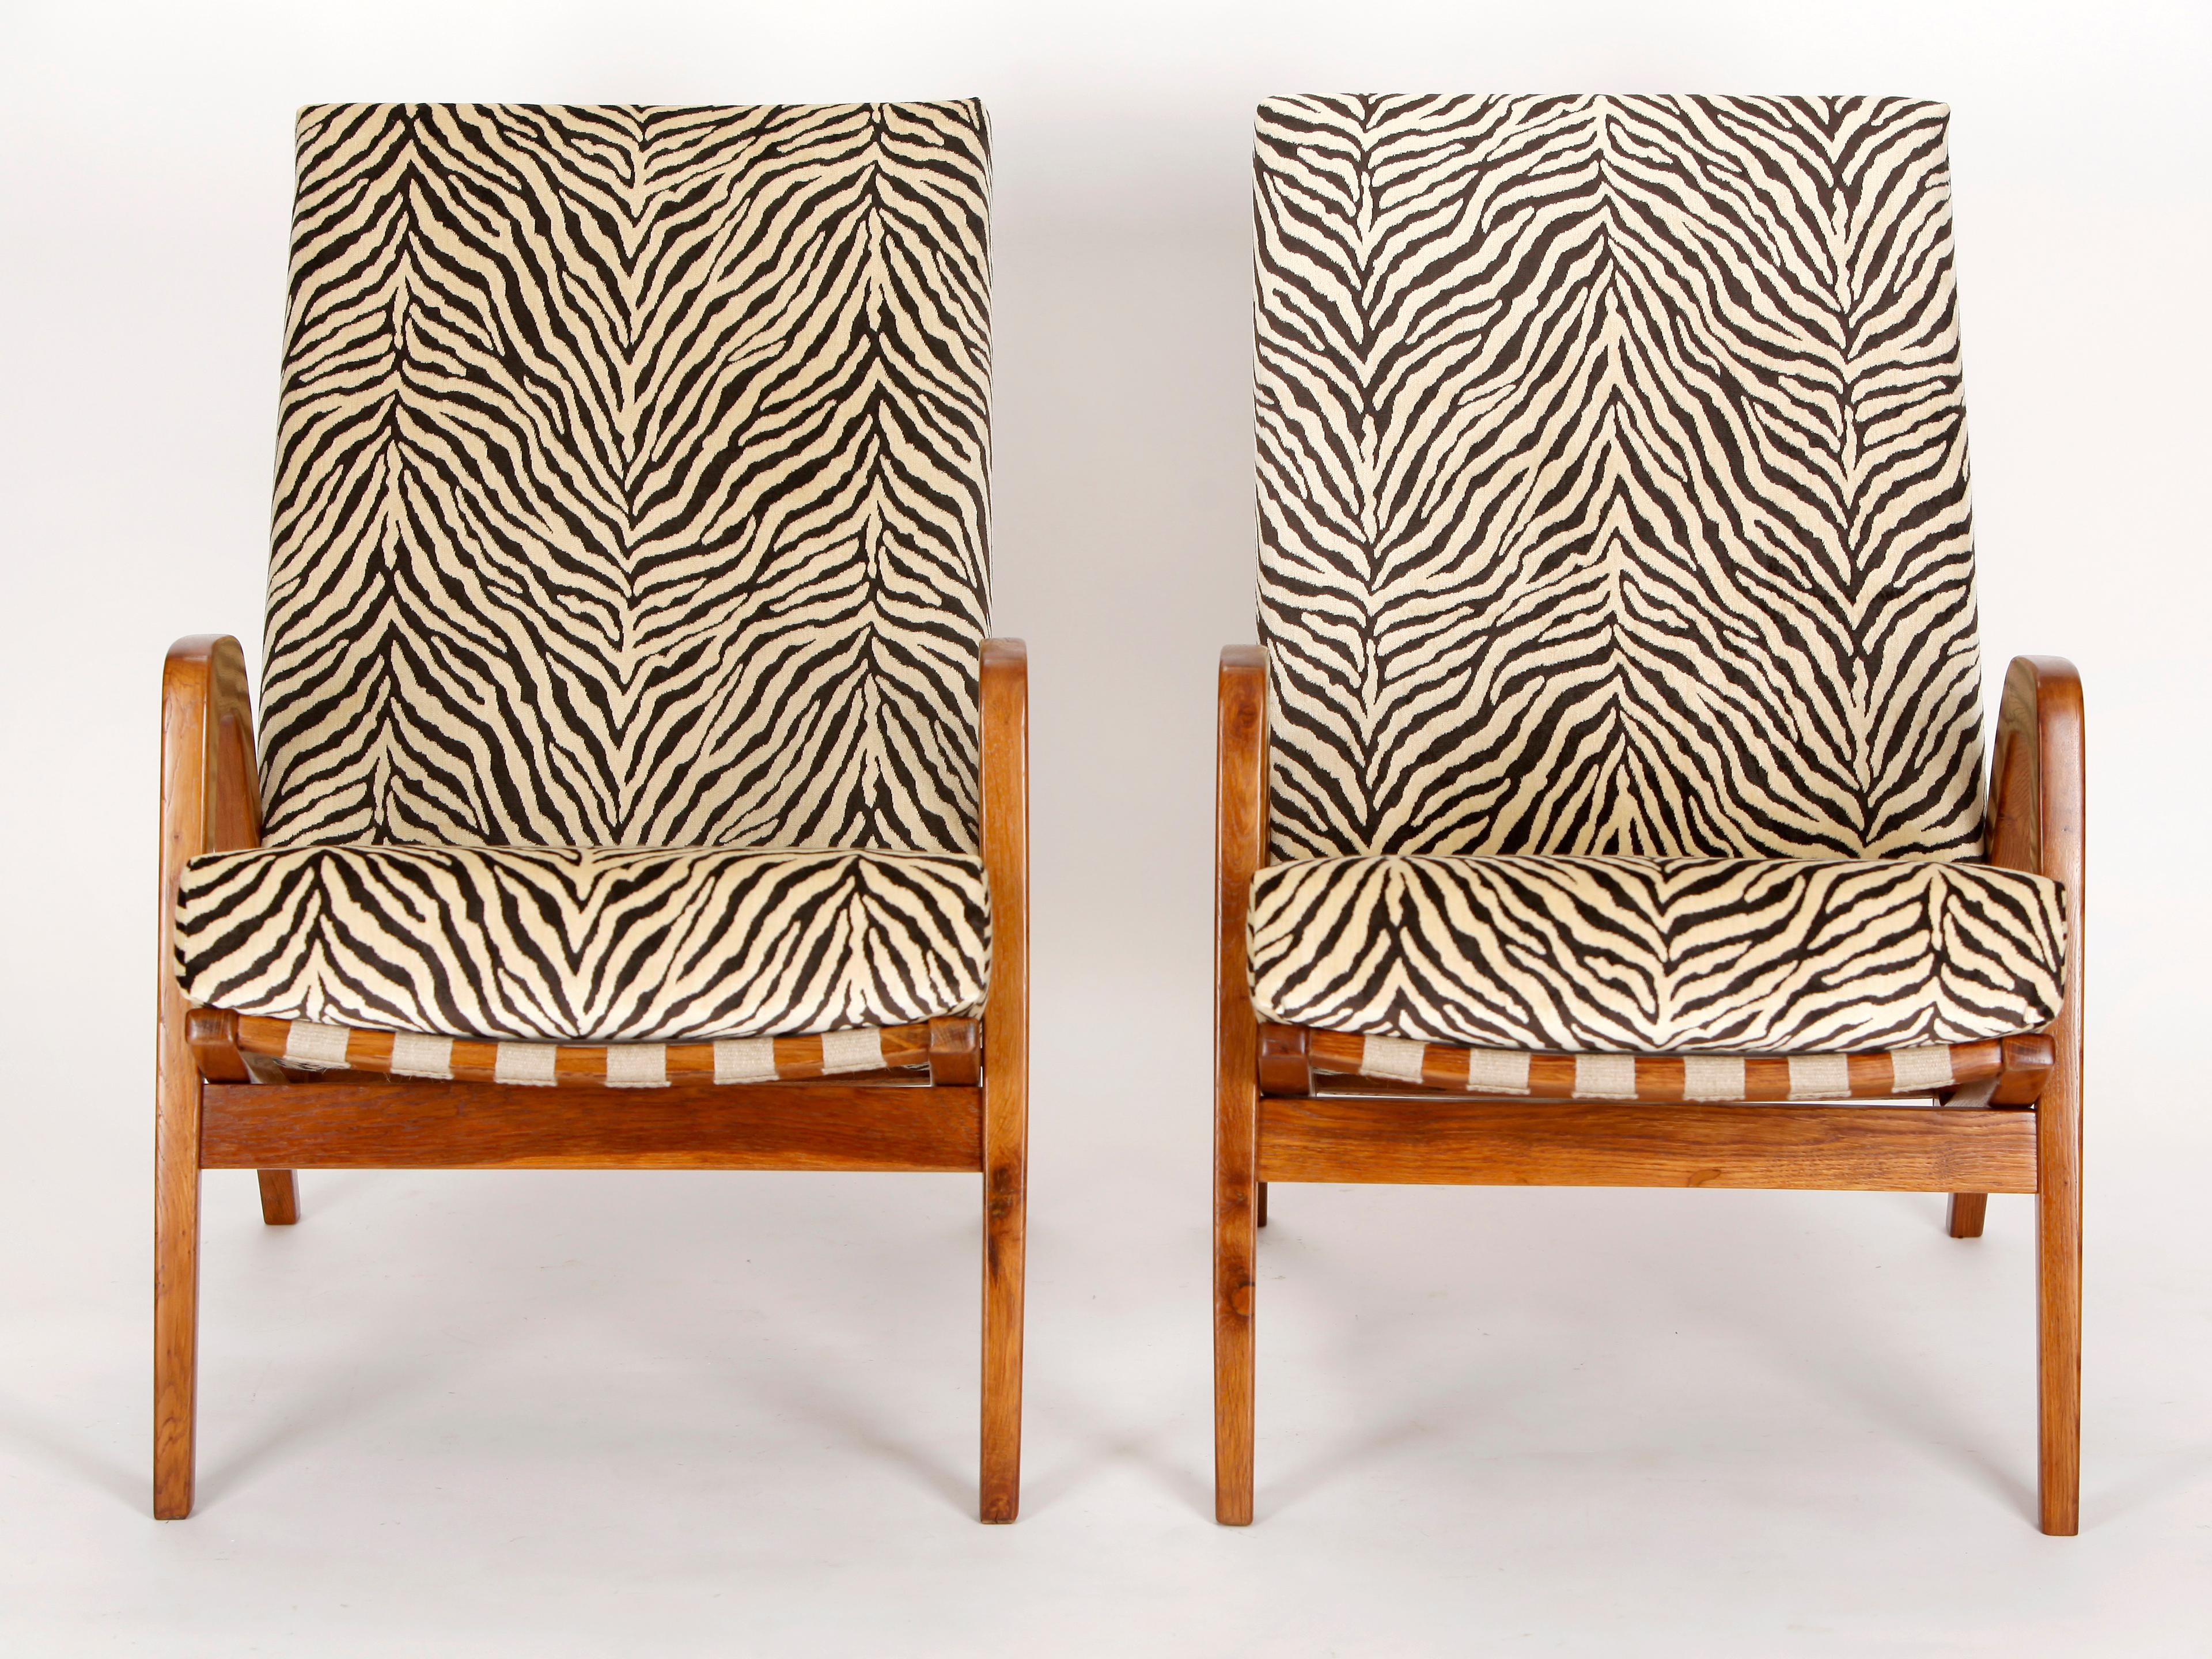 These two armchairs was made in the former Czechoslovakia in the 1950s. The hemp straps have been renewed and the wooden parts repainted. The cushions have a coconut fiber core wrapped in sheep wool. The cover is made from zebra print velvet by the